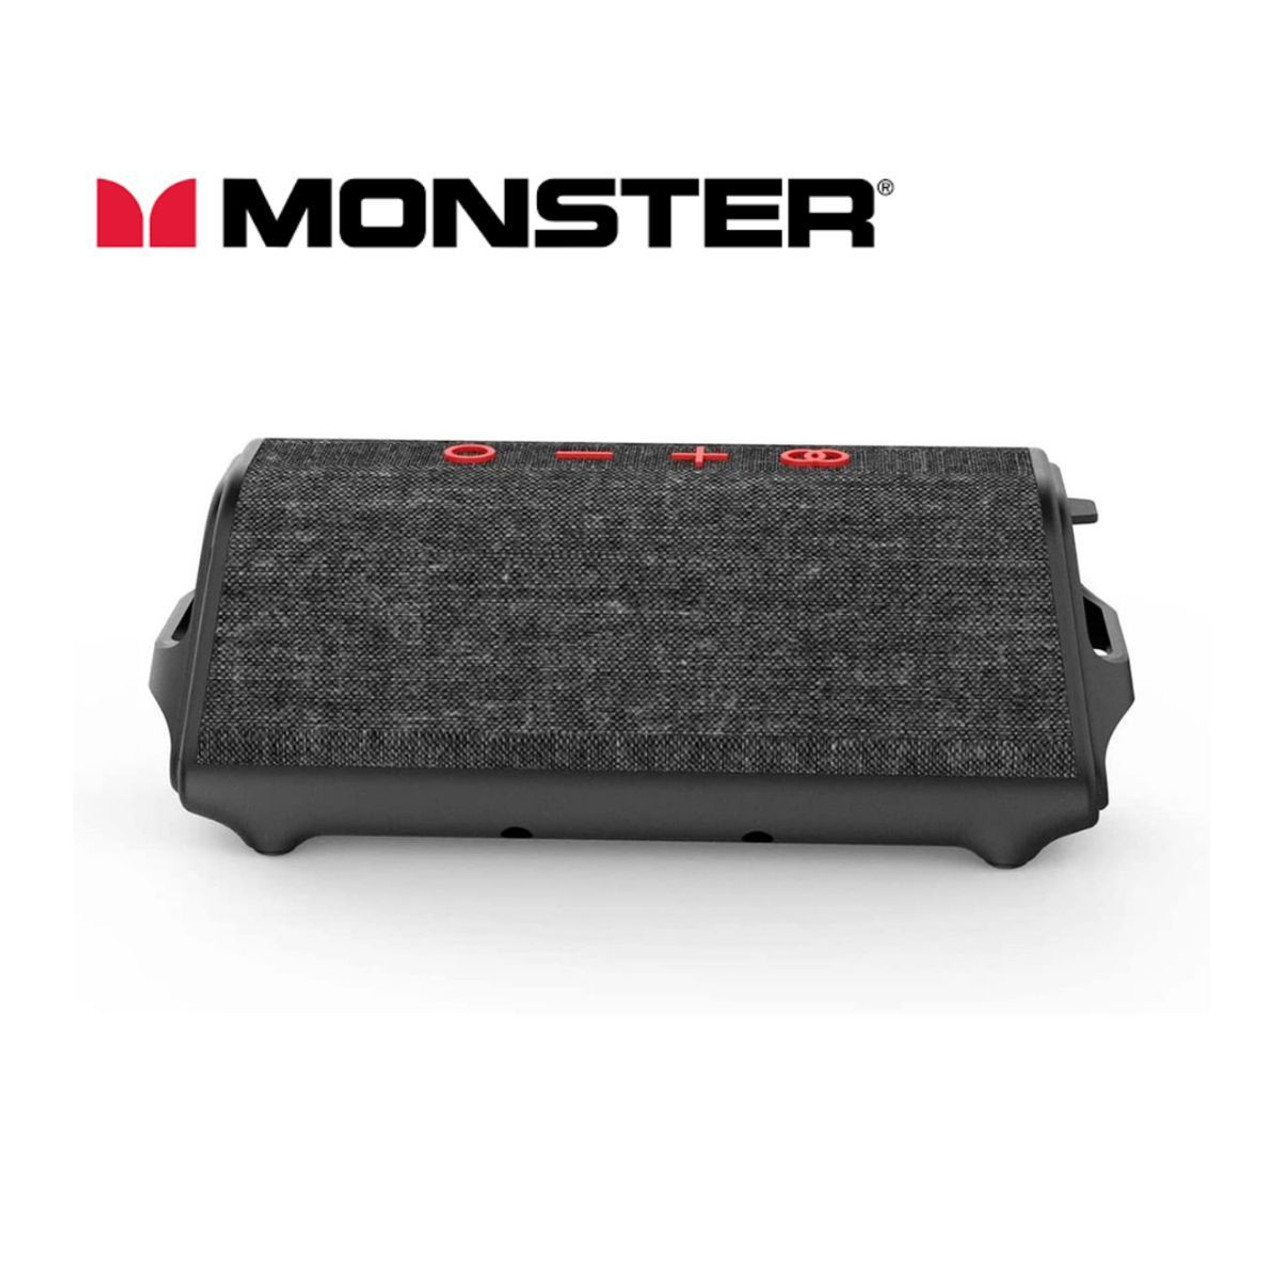 Monster ICON Portable Waterproof Bluetooth Speaker Voice-Enabled-Black product image